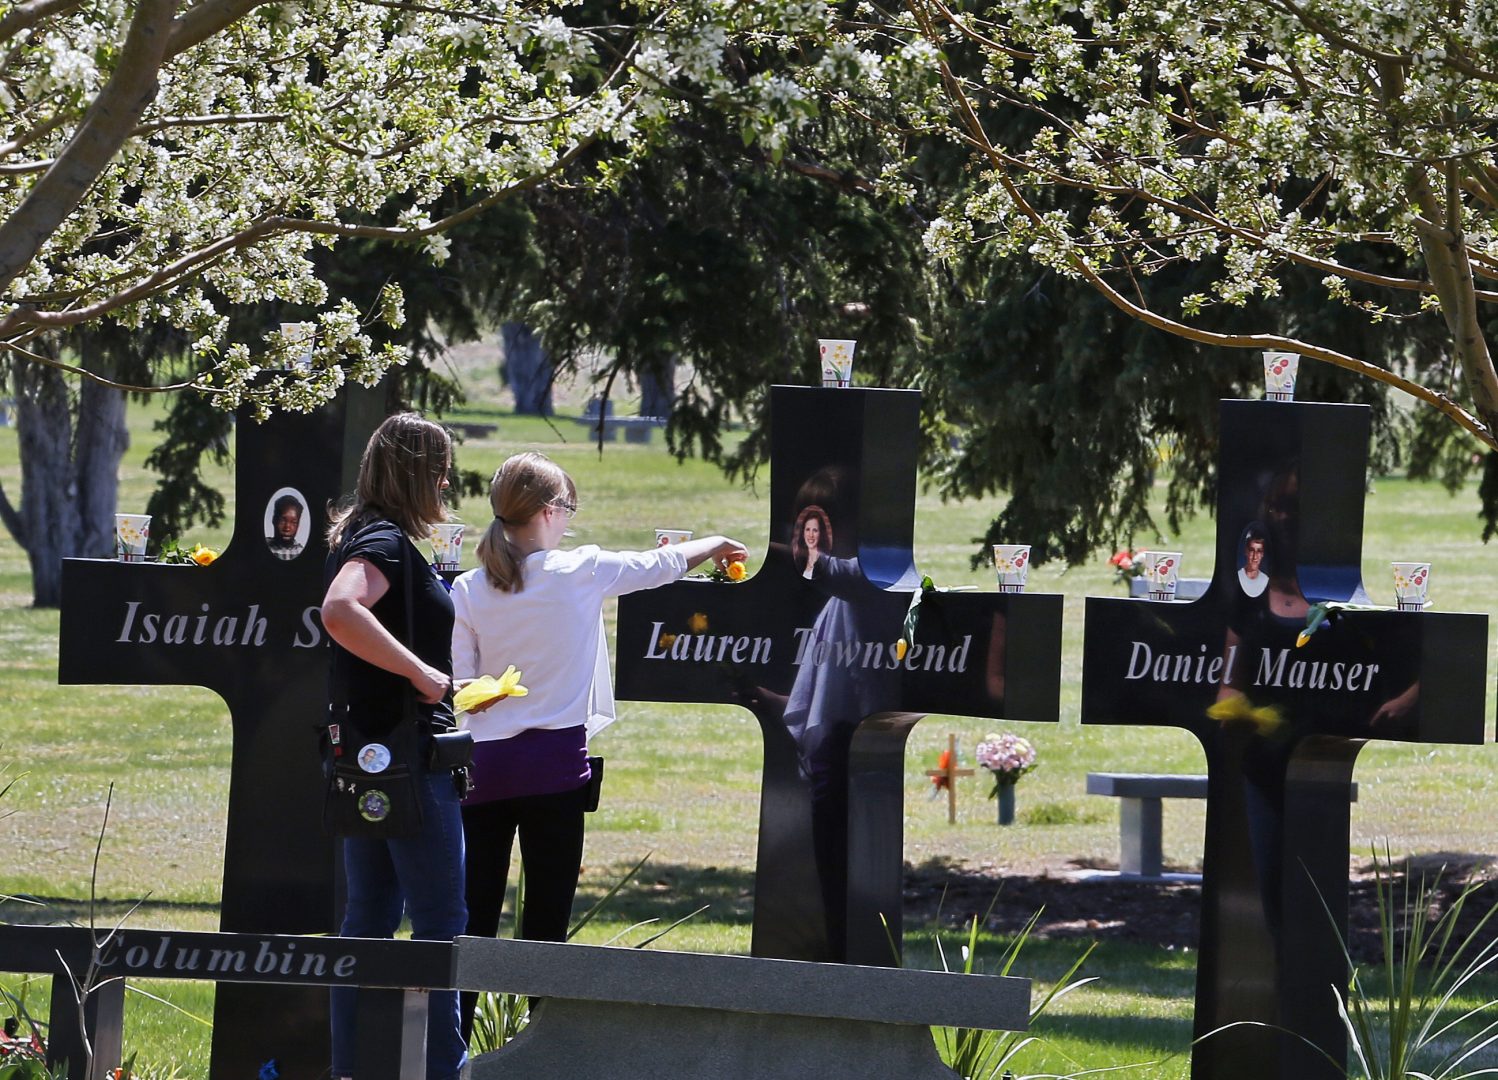 FILE - A family visits the memorial crosses dedicated to the the 13 people killed in the 1999 Columbine High School shooting attack, at Chapel Hill Memorial Gardens in Littleton, Colo., Easter Sunday, April 20, 2014. There have been dozens of shootings and other attacks in U.S. schools and colleges over the years, but until the massacre at Colorado's Columbine High School in 1999, the number of dead tended to be in the single digits. Since then, the number of shootings that included schools and killed 10 or more people has mounted .